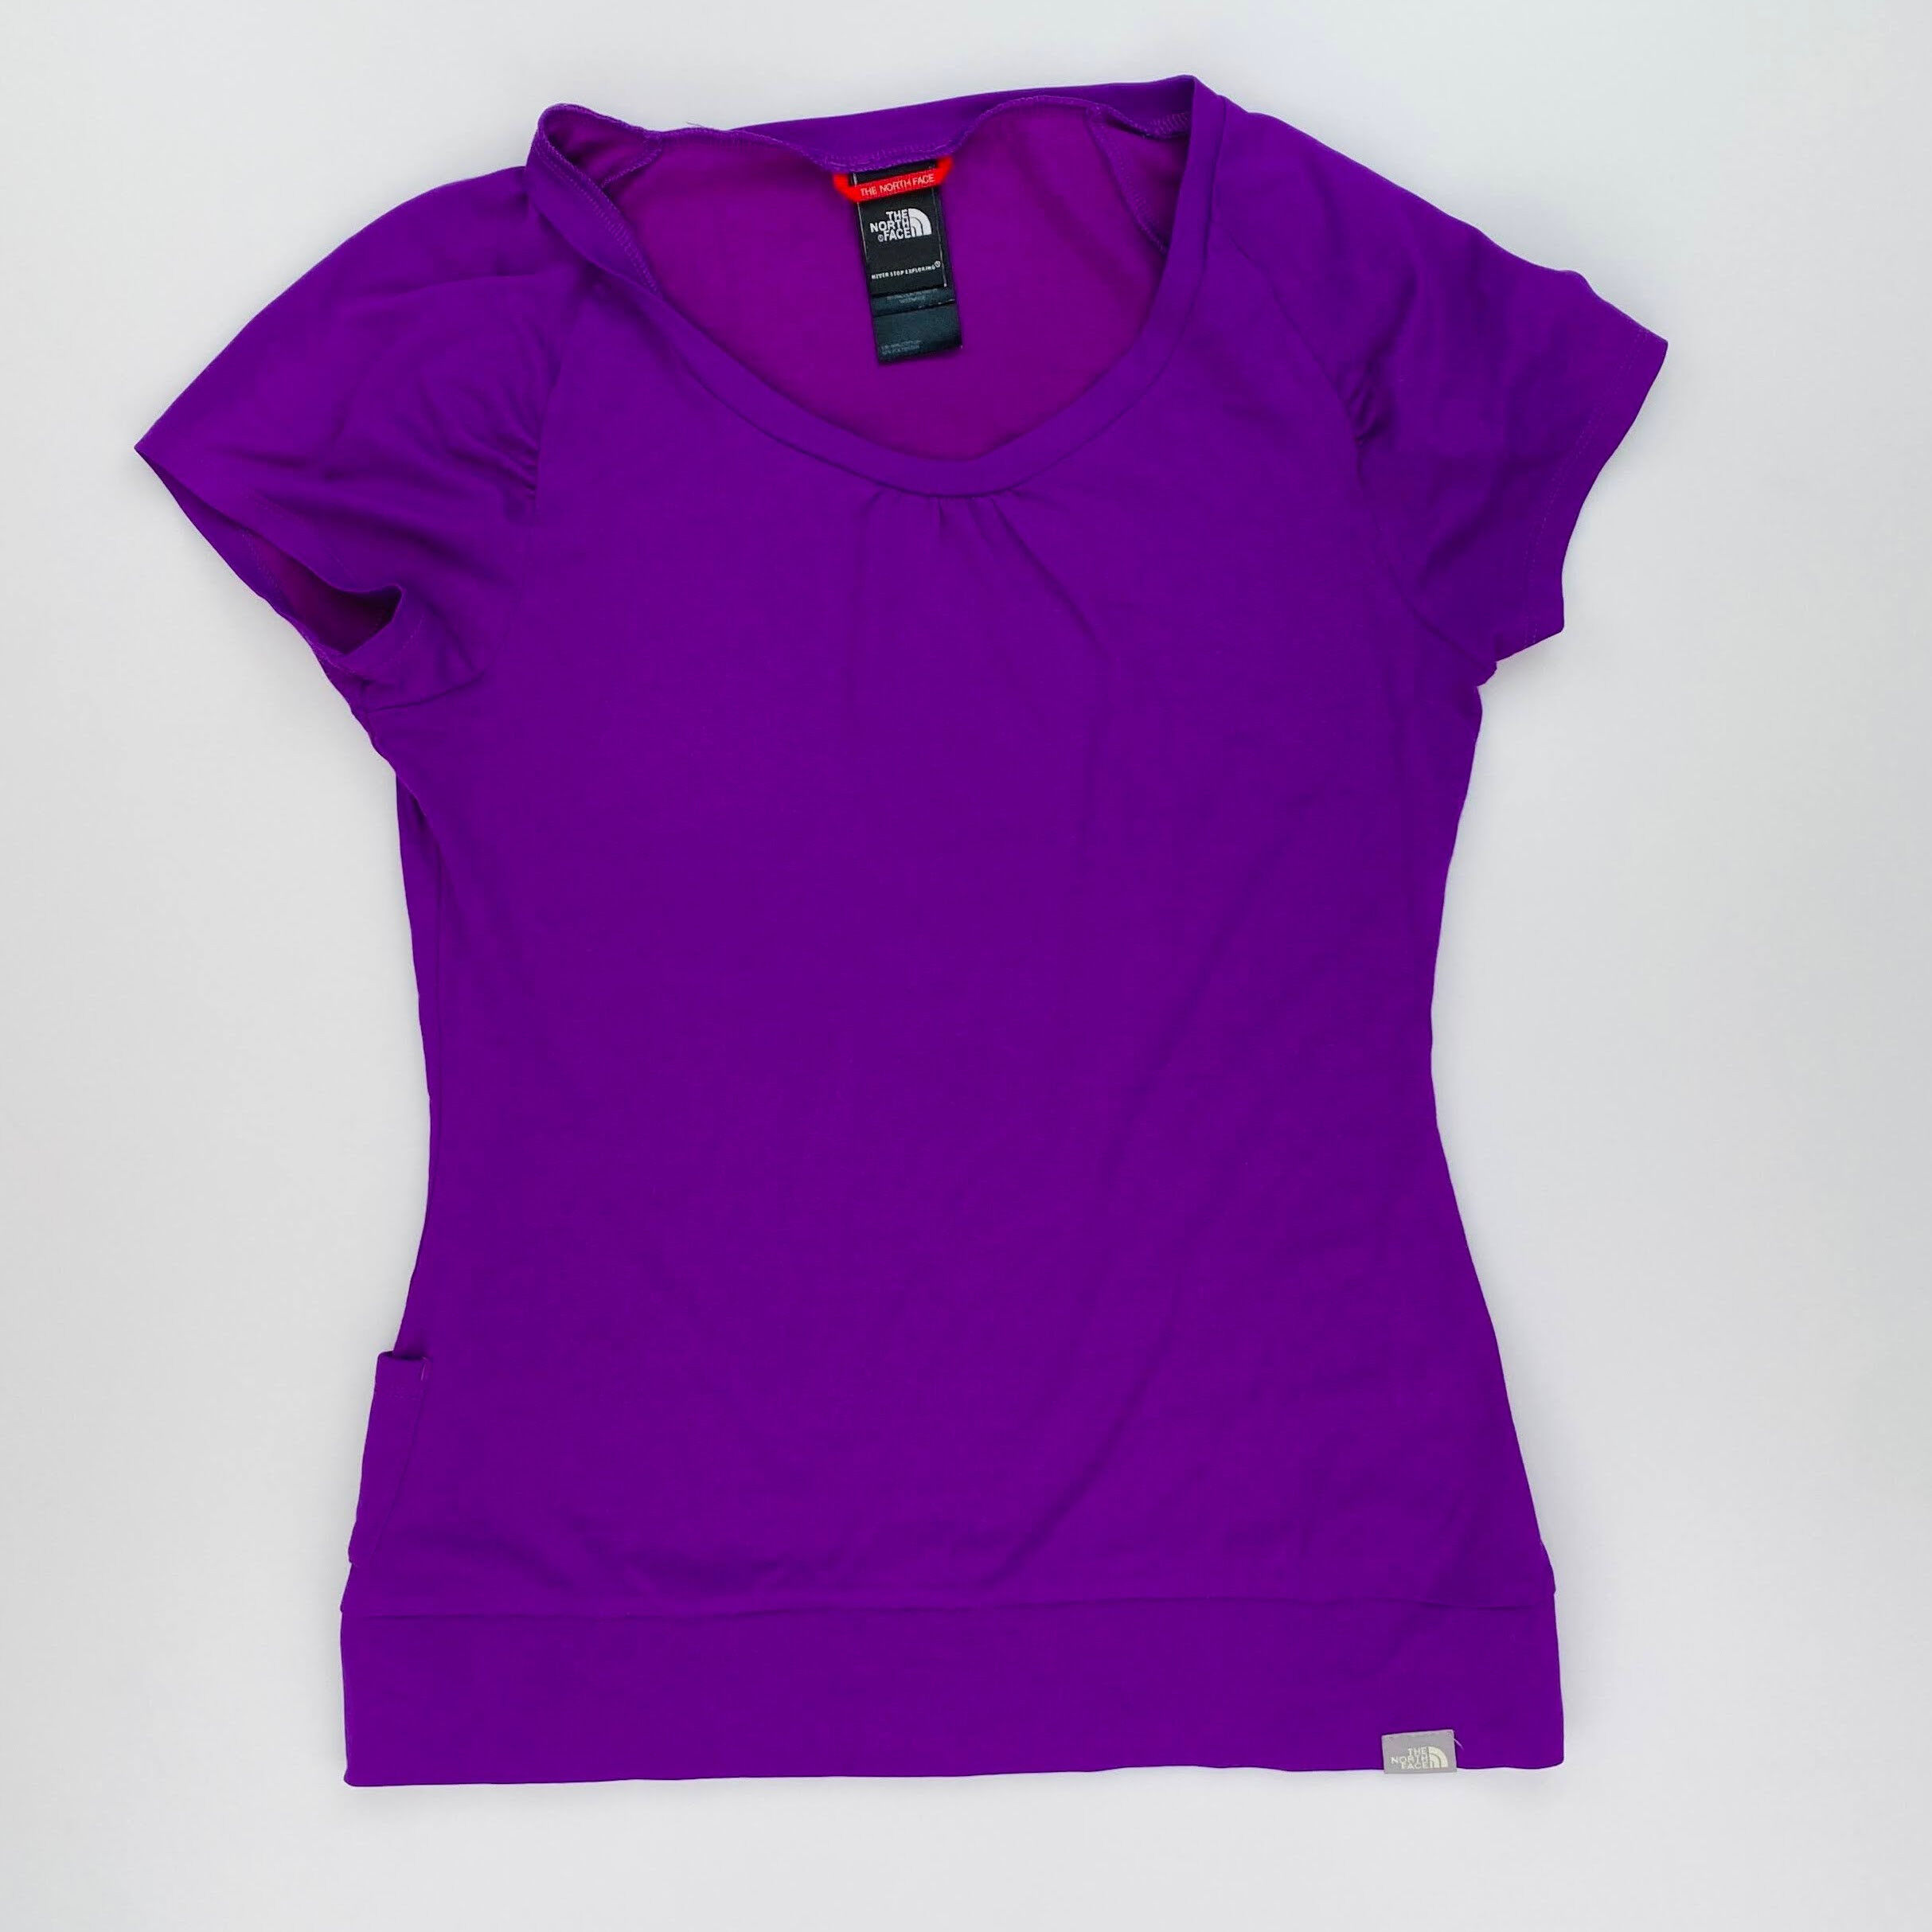 The North Face Tshirt Ambition - Seconde main T-shirt femme - Violet - S | Hardloop